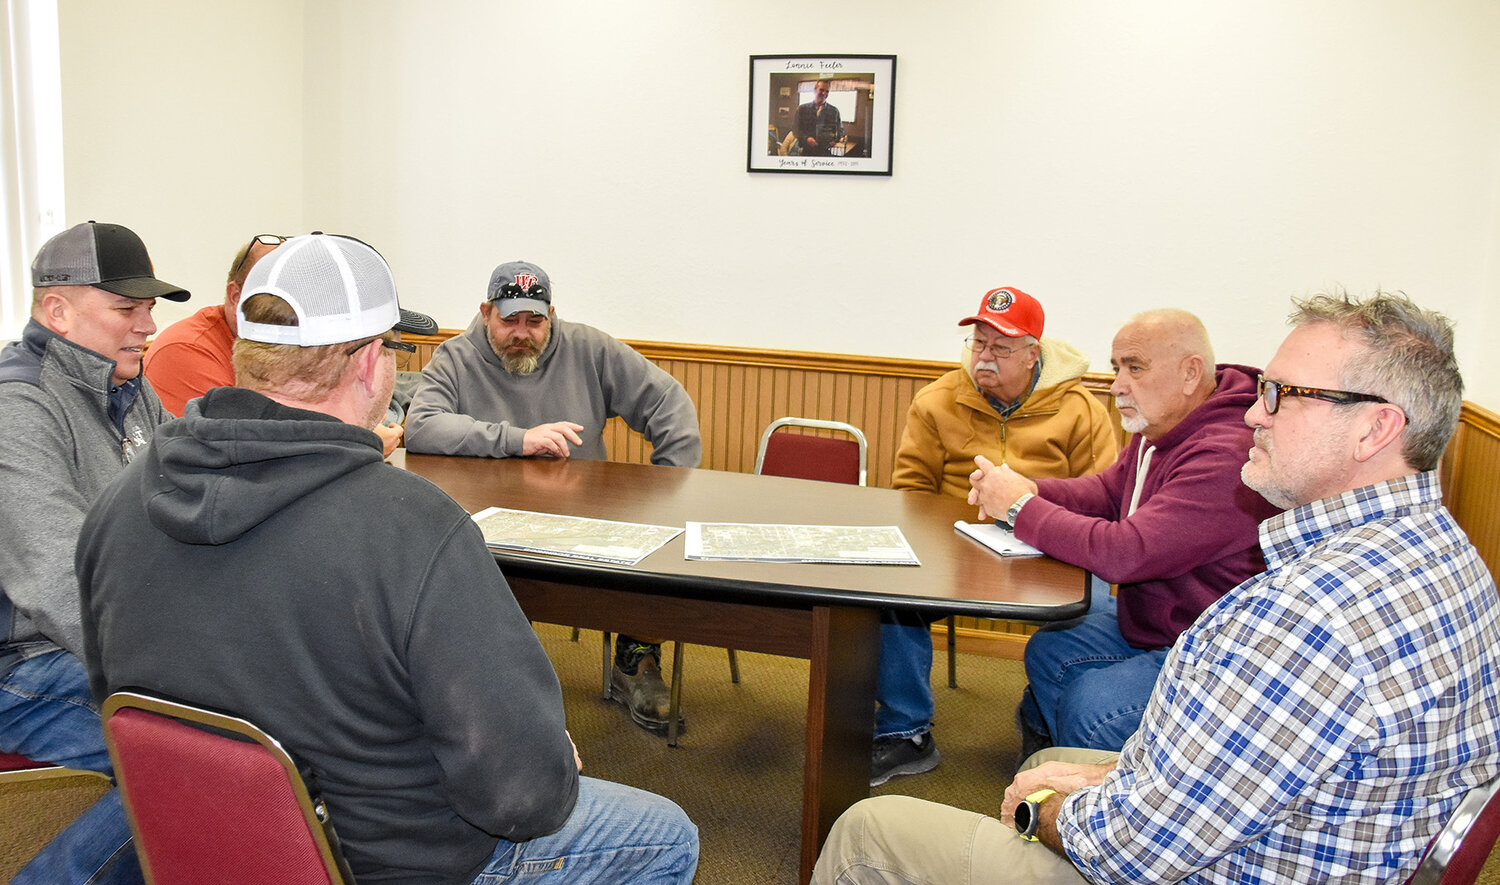 Belle resident Jimmy Zumwalt requested a meeting on Jan. 29 to act as a liaison between Mayor Pro Tem James Mitchell and city employees, Jeff Meadows with Archer-Englin Engineering and Ron Bench with State Parks to discuss the future of Belle’s Rock Island Trail grant.